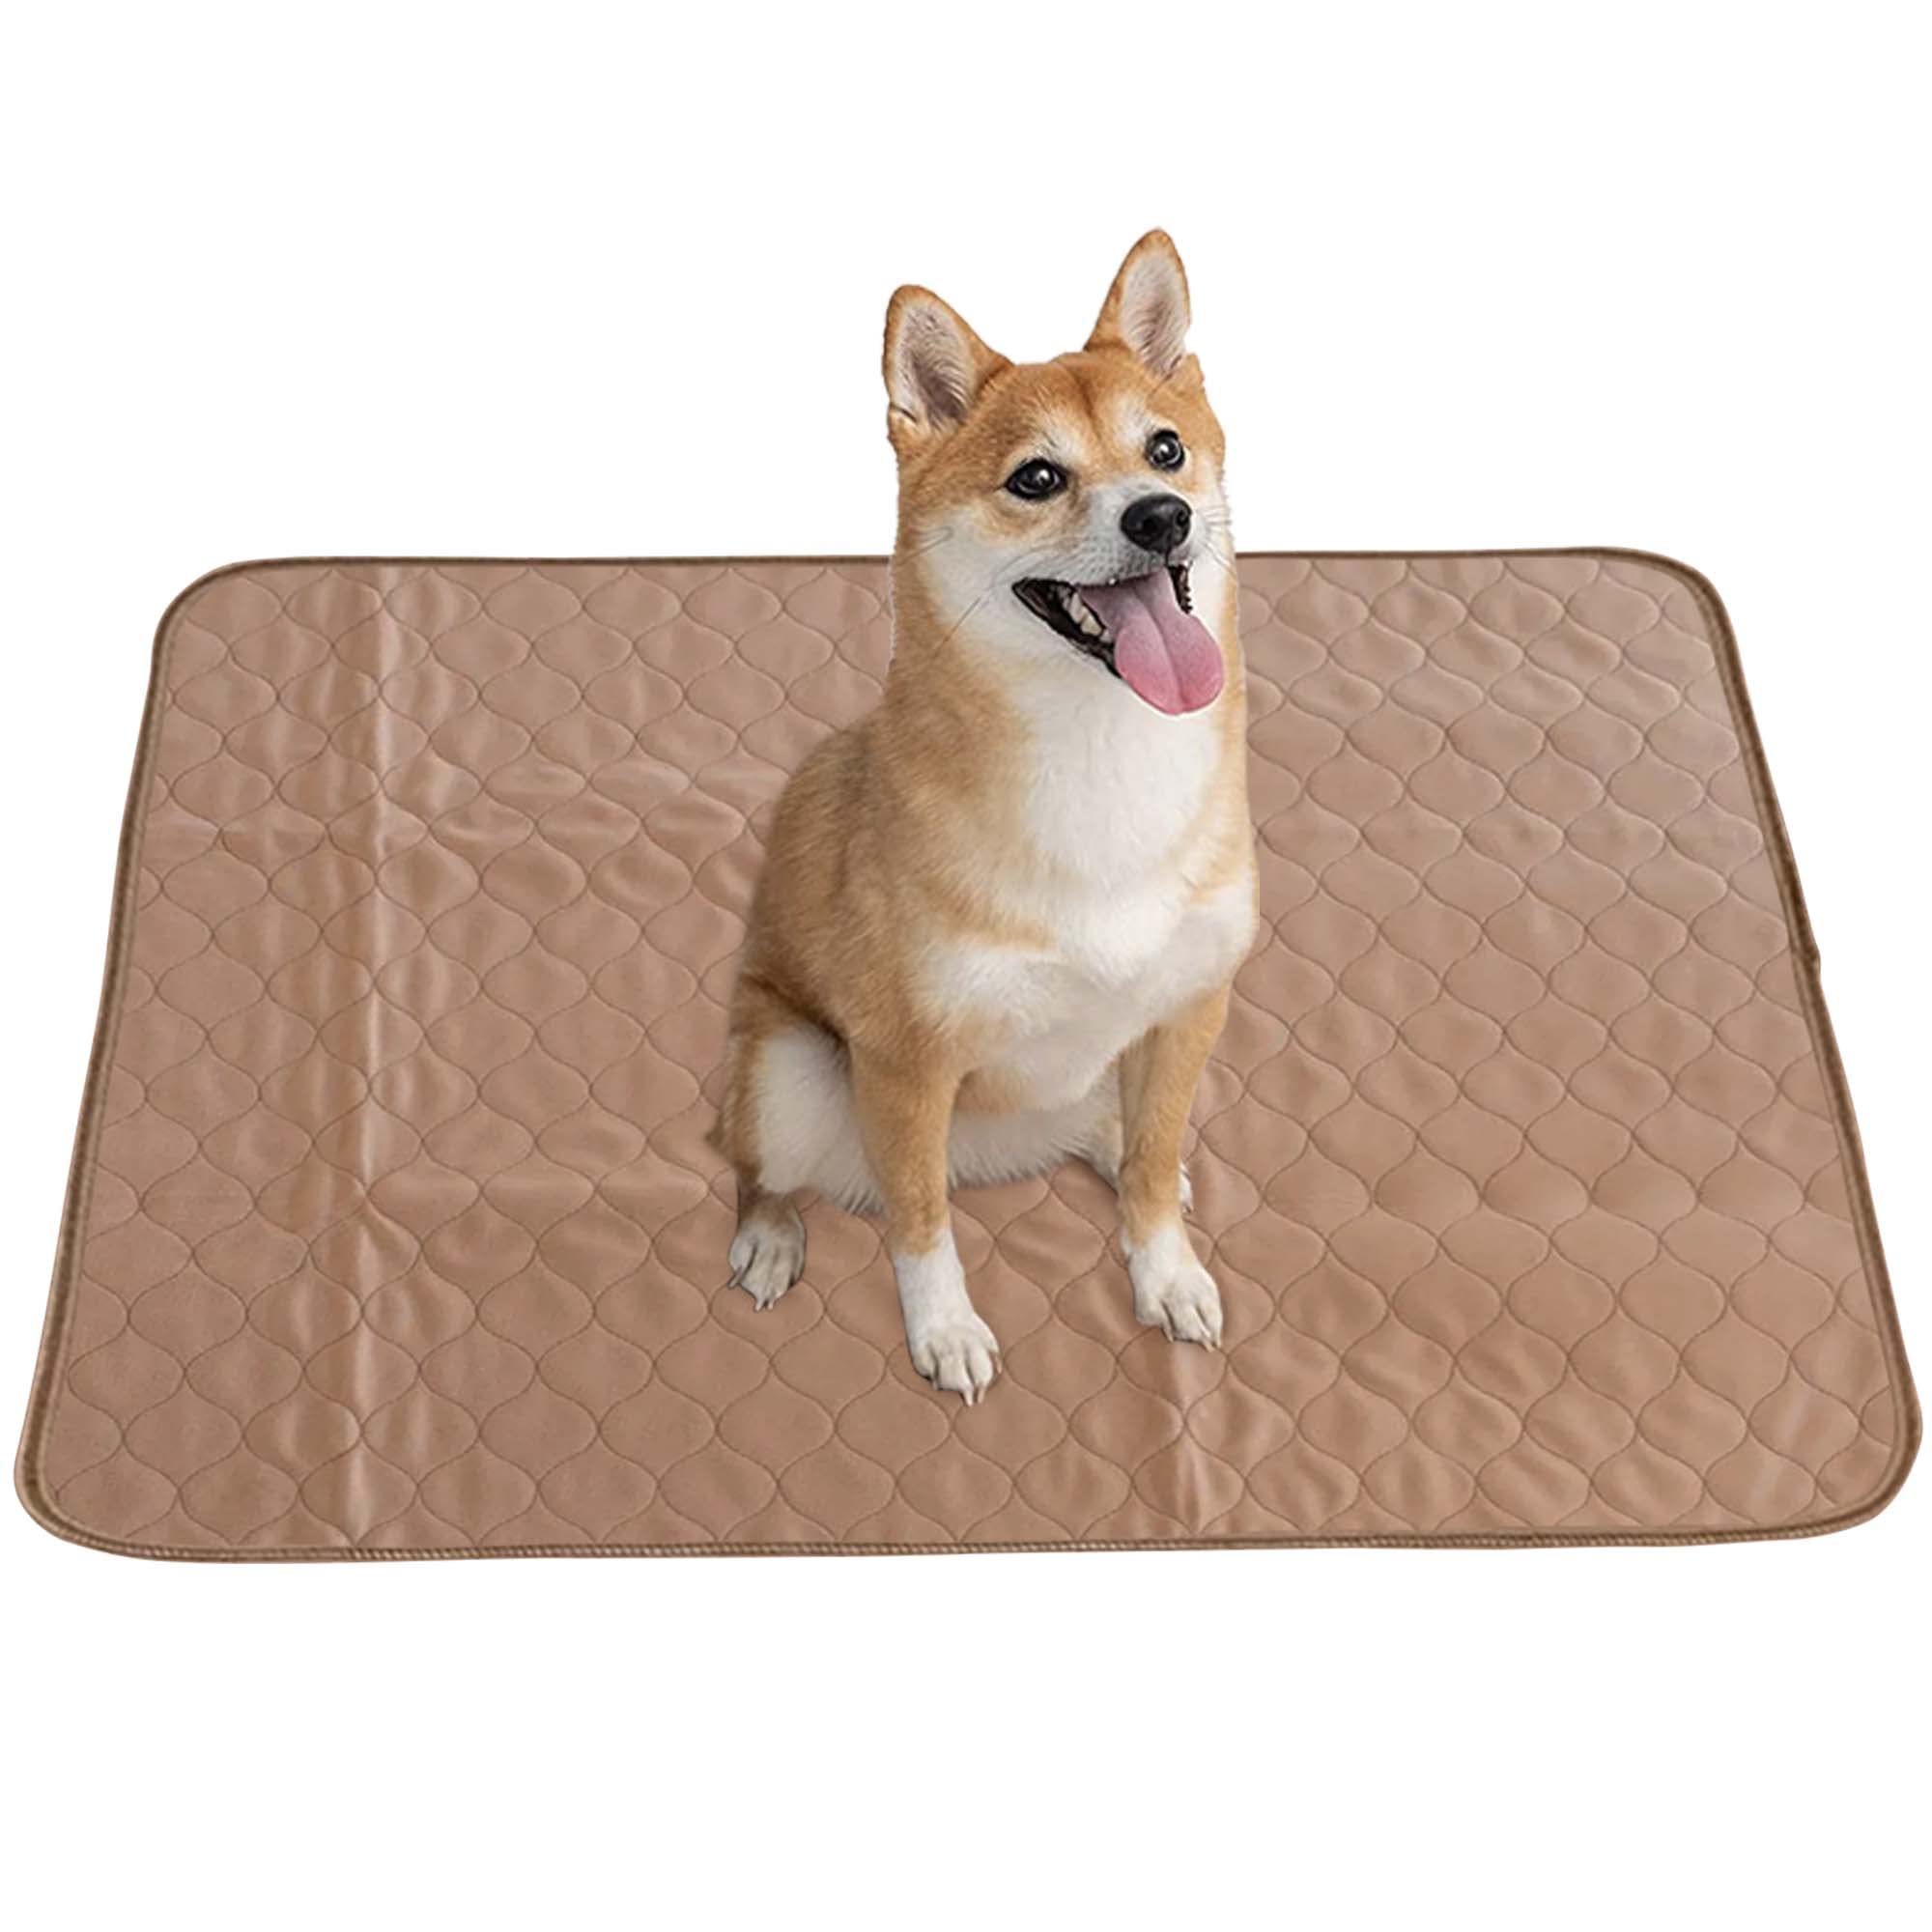 Book Cover EZwhelp Reusable Dog Pee Pads - Waterproof Training Pads for Dogs - Washable & Sanitary - Rounded Corners - Laminated, Lightweight, and Durable - Perfect Pet Essentials for Puppy Training and Whelping - 34